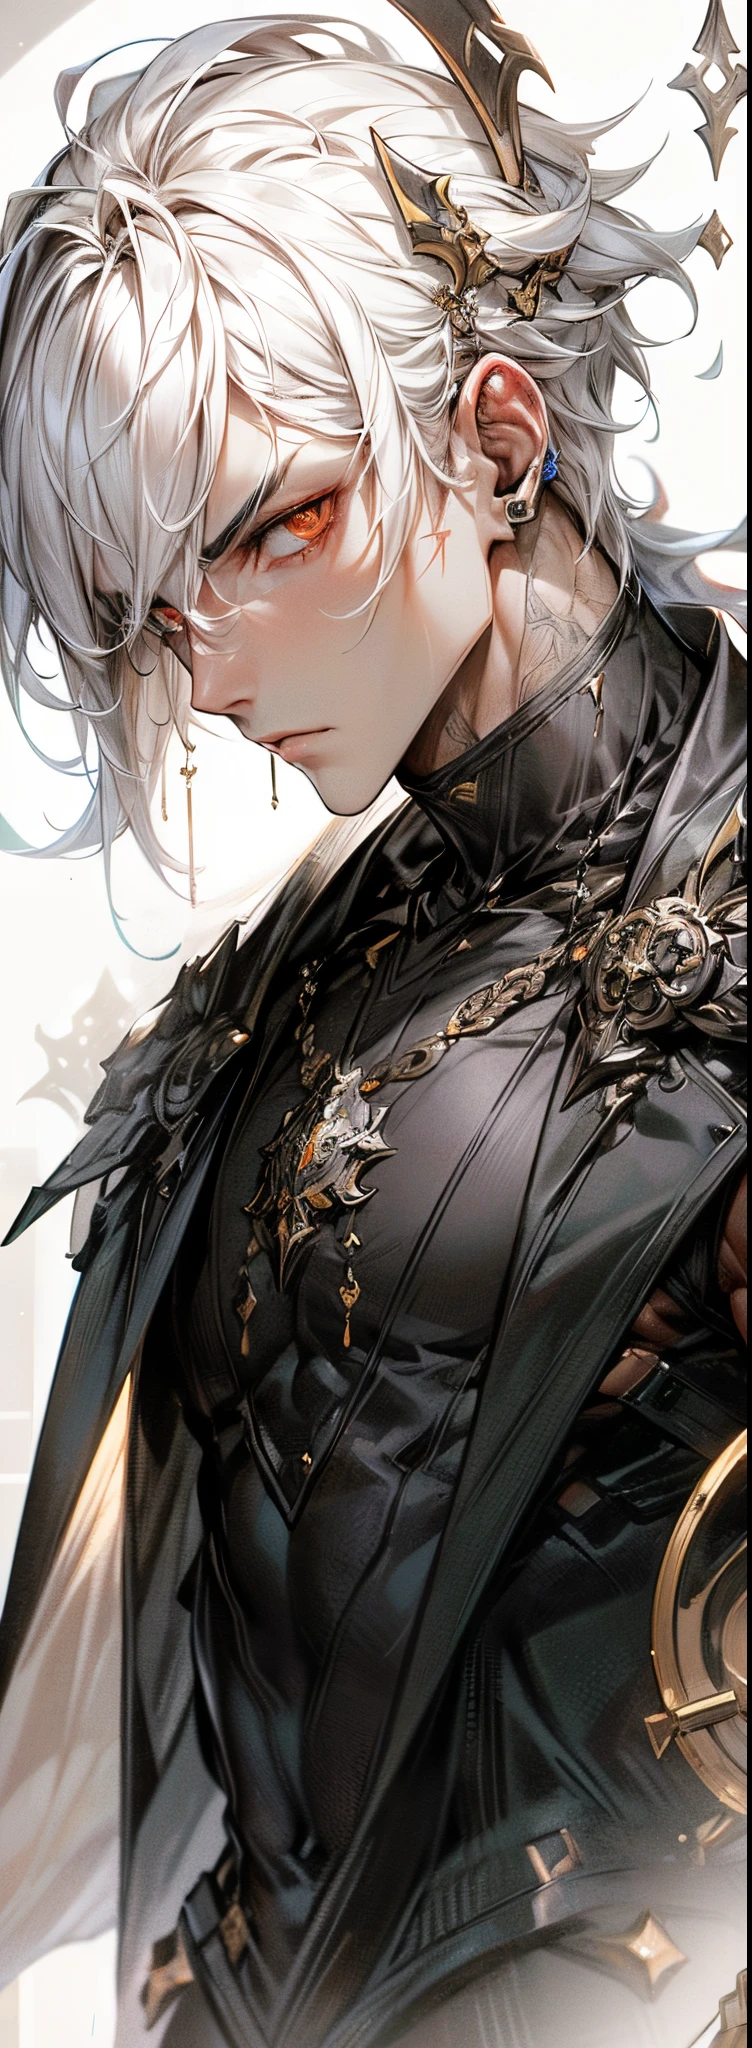 An epic and visually stunning digital artwork featuring a mid-30's masculine male with an angular facial structure and a flat masculine chest. The character is adorned in a heavy dieselpunk style with a heavy metal aesthetic, wearing eyeshadow for added intrigue. The image showcases the beauty and elegance of the character, who is wearing mechanical armor plating. The character has bright piercing orange eyes that stand out against their pure white armor plating. The armor is gorgeously engraved and resembles an armored trench coat. The character also possesses androgynous features, with mechanical muscled arms adding to their unique appearance.